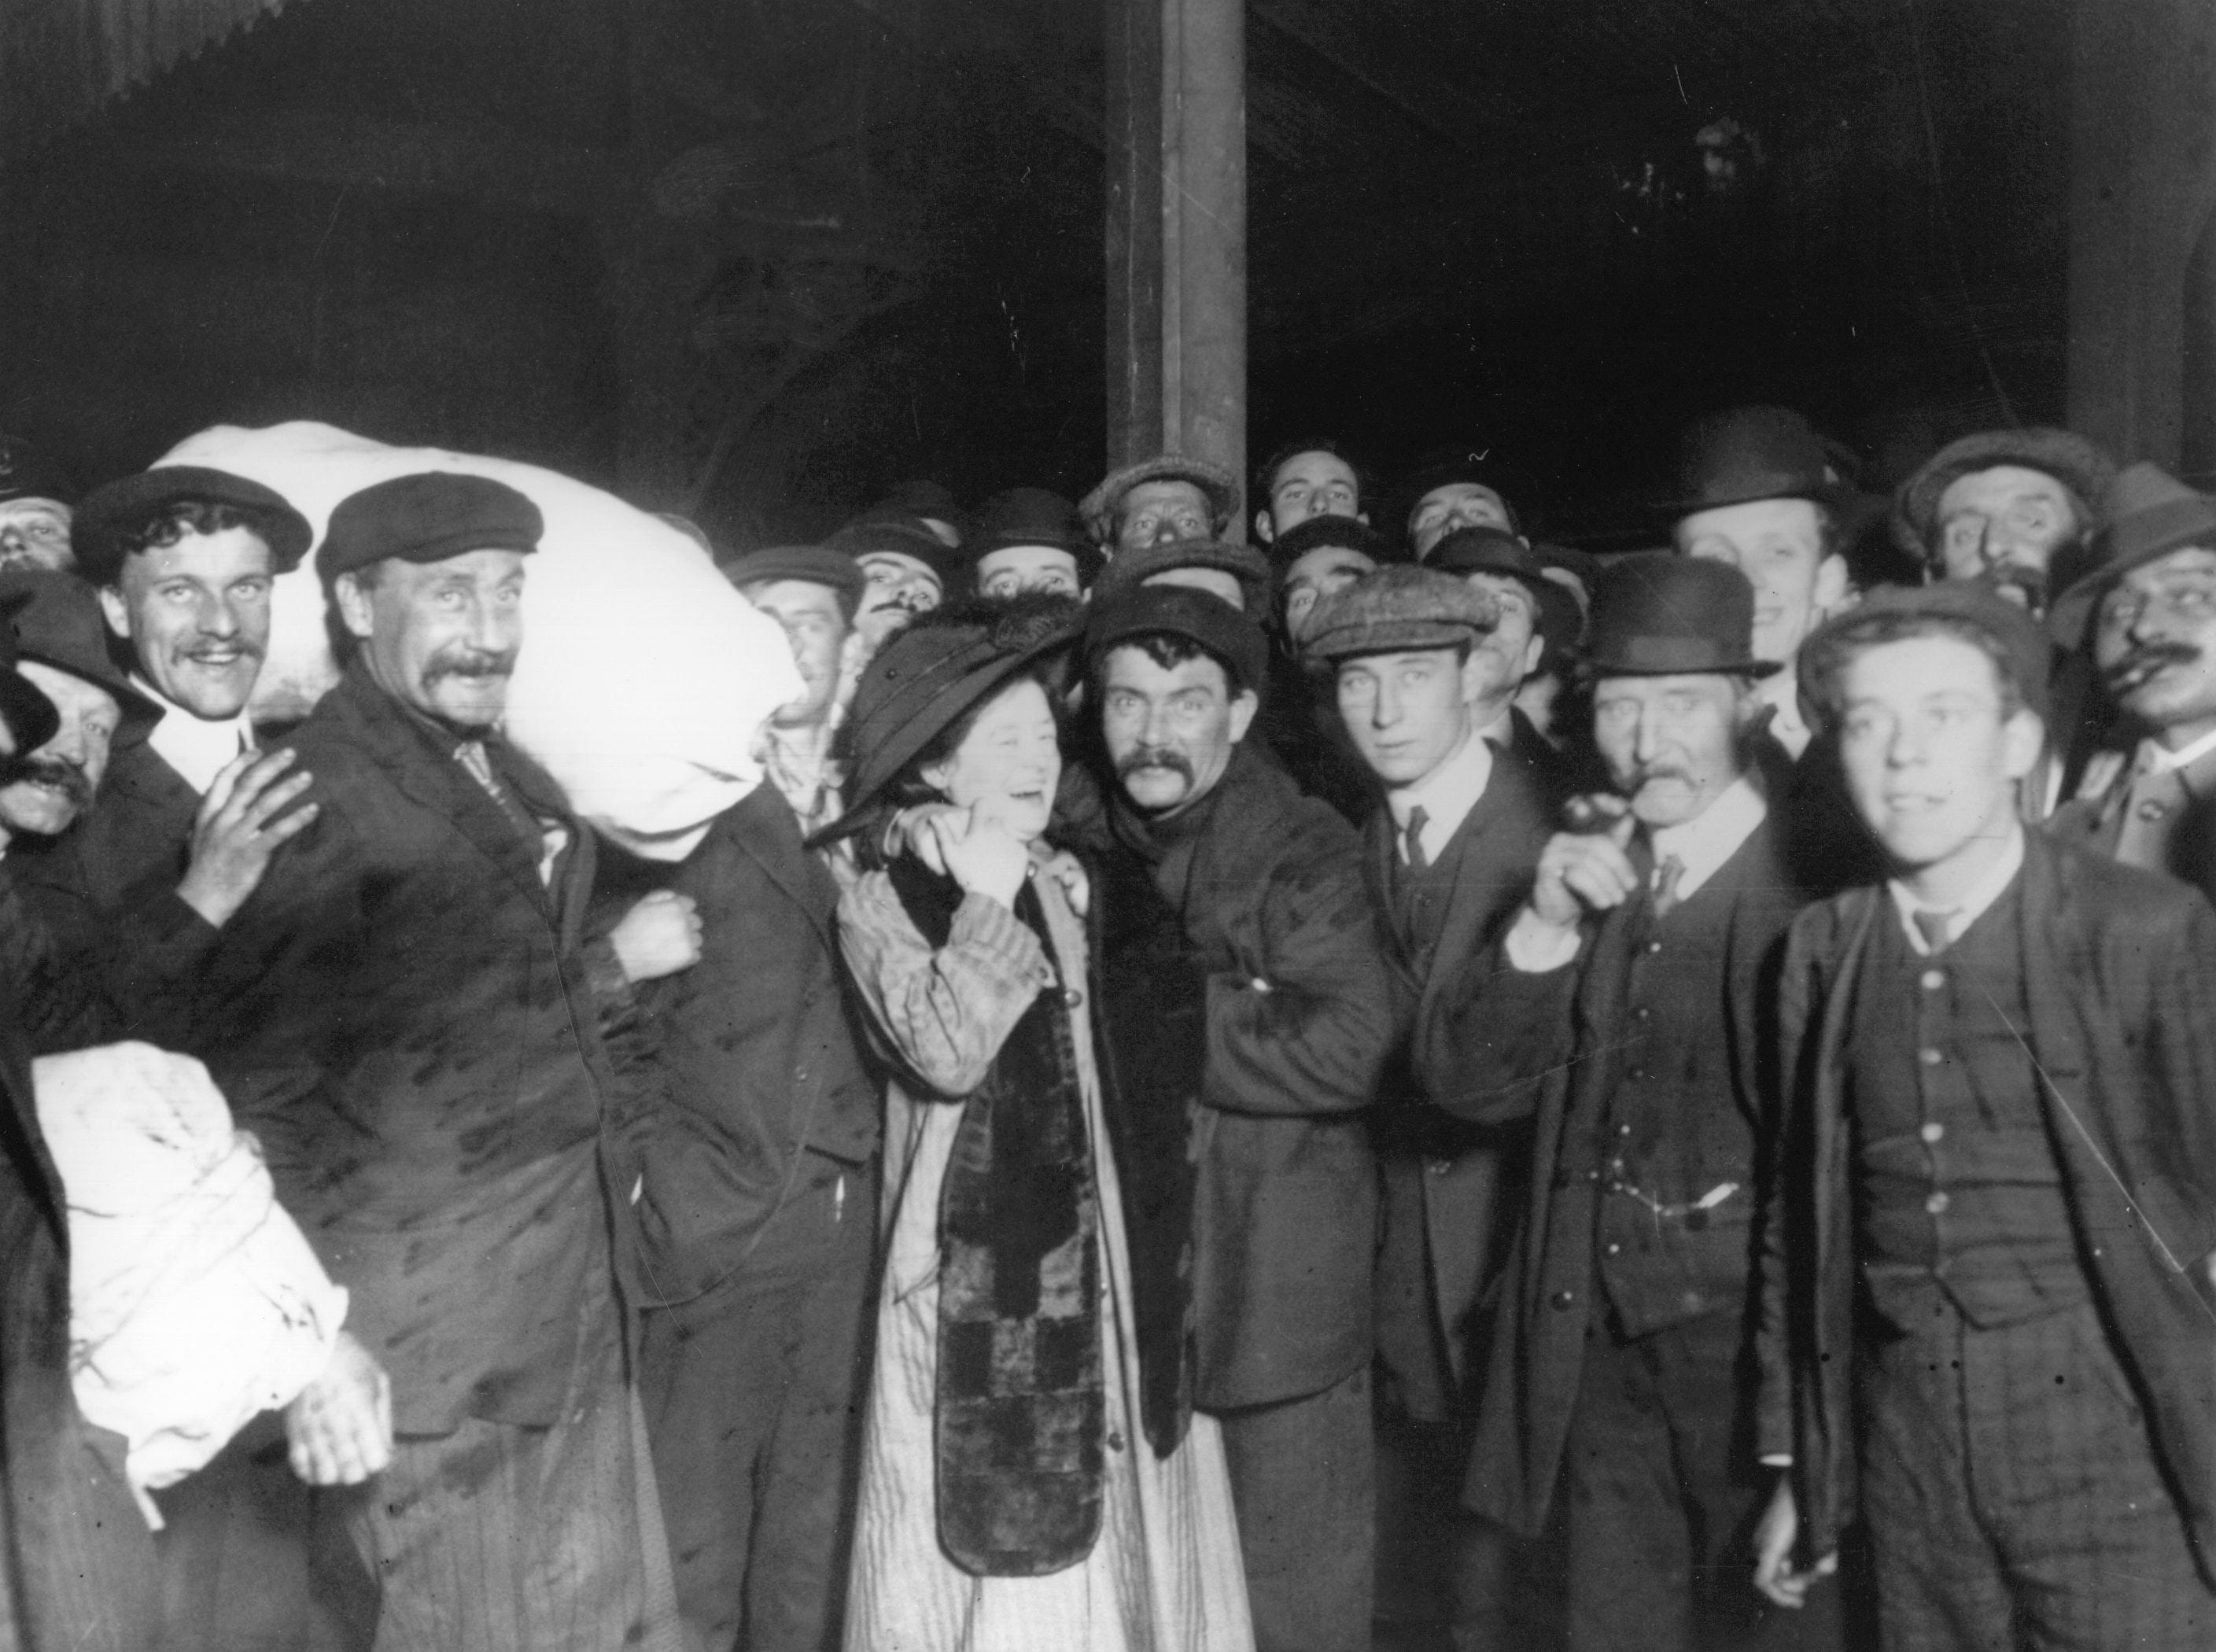 <p><a href="https://www.nydailynews.com/new-york/carpathia-rescued-hundreds-titanic-survivors-article-1.802393">Families of passengers</a> arrived hoping to be reunited with loved ones, according to the New York Daily News. Ambulances and hearses lined the streets waiting to tend to the survivors or cart away any of the dead. </p>